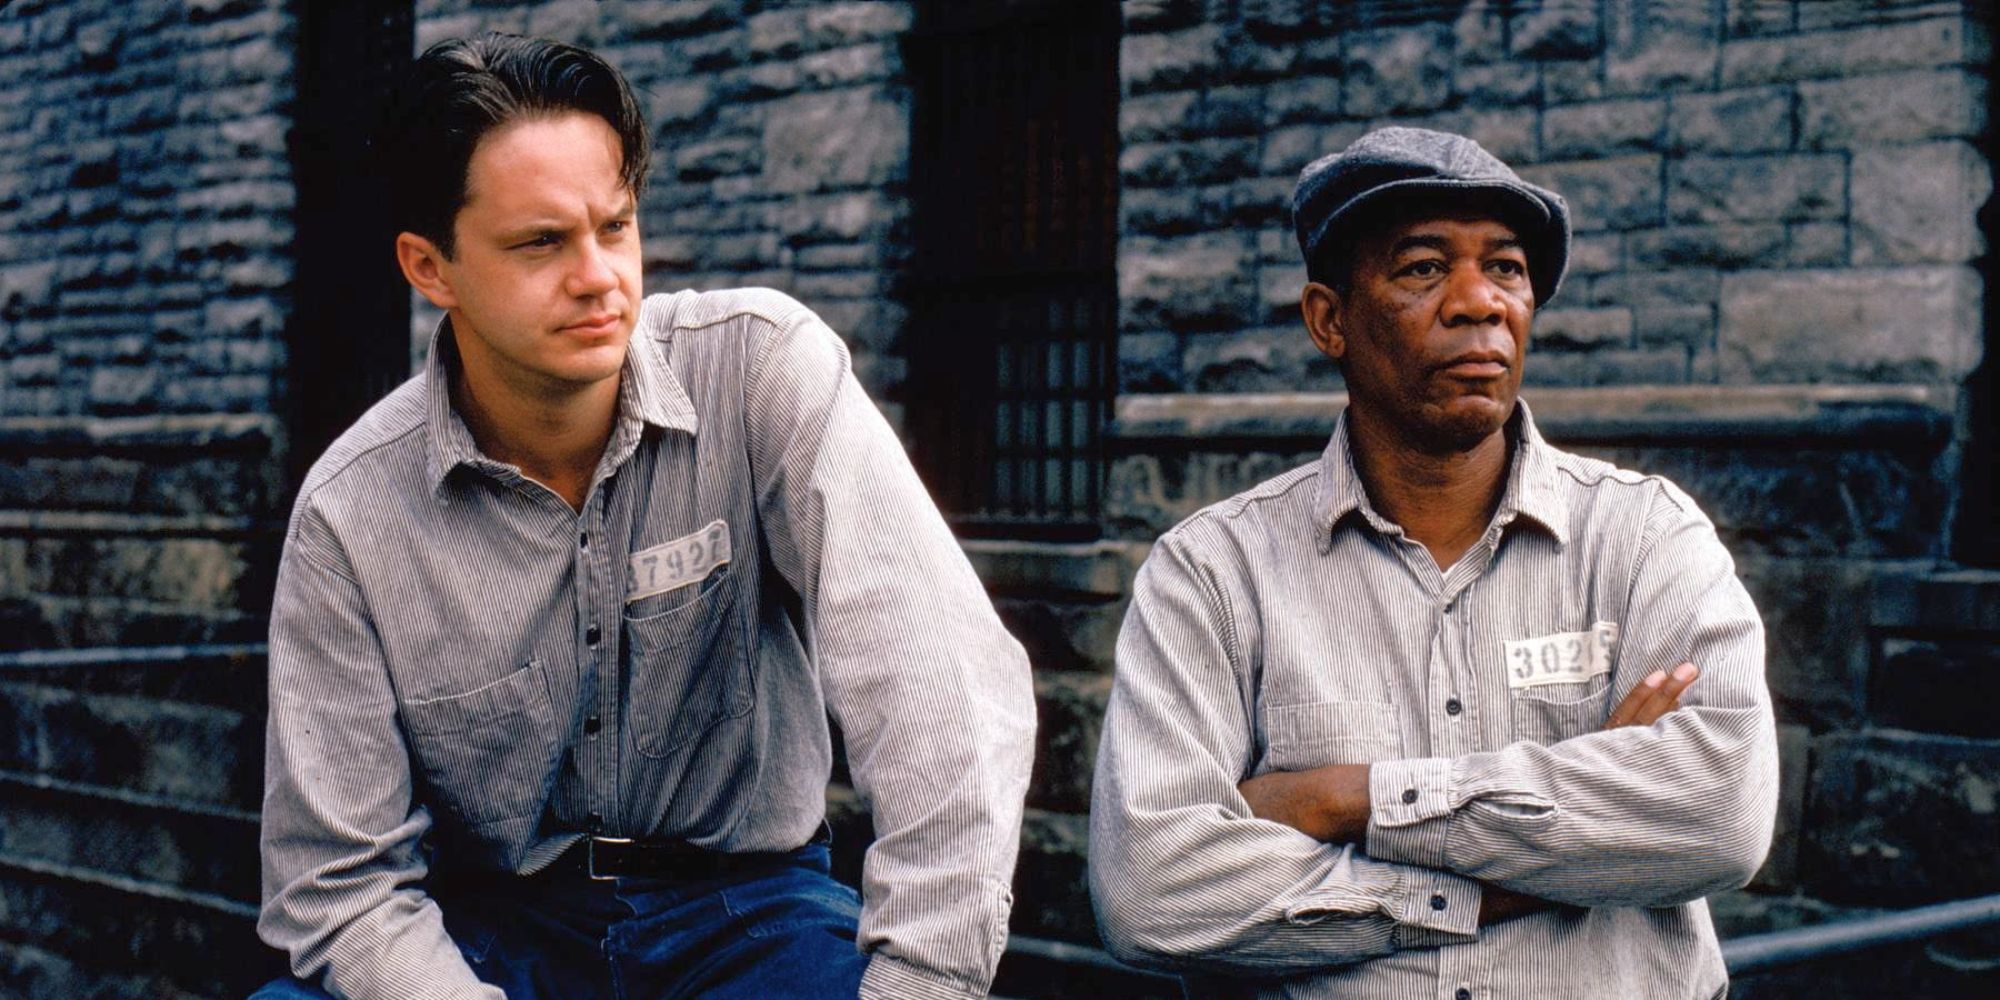 Tim Robbins as Andy Dufresne and Morgan Freeman as Ellis 'Red' Redding sit in prison uniforms in a still from The Shawshank Redemption, adapted from a Stephen King work